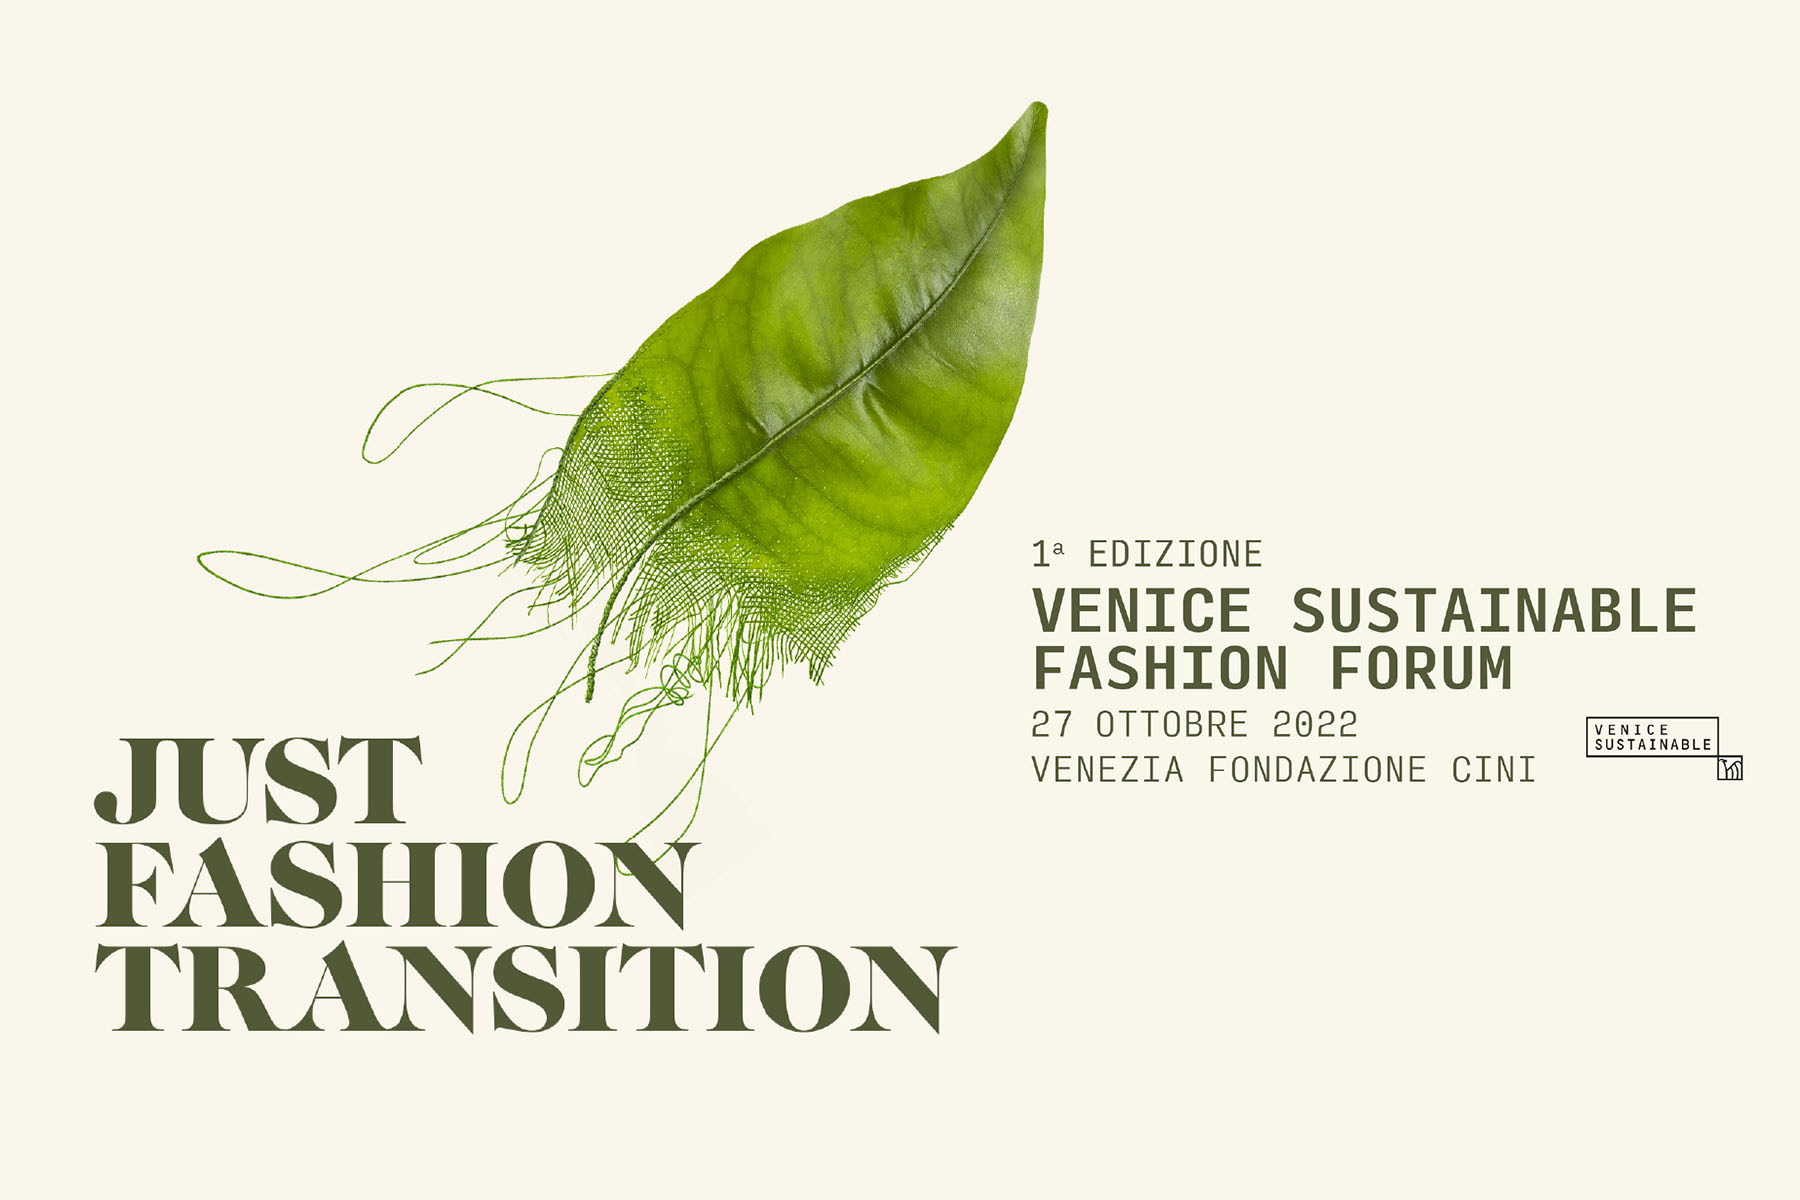 Venice Sustainable Fashion Forum 2022 The UN Alliance for Sustainable